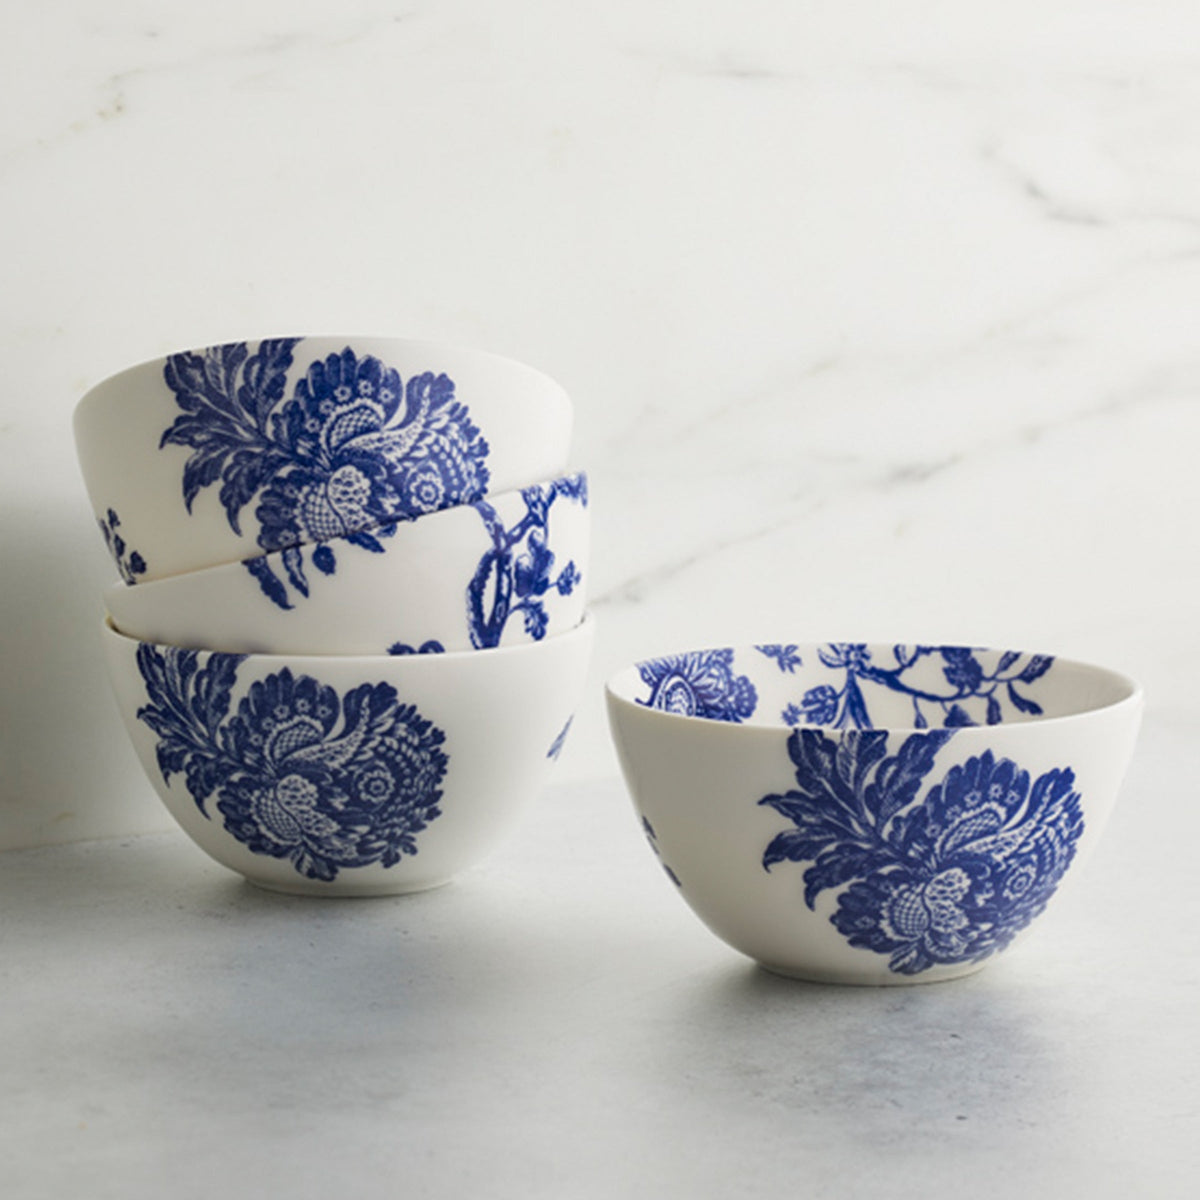 Four white Arcadia Caskata porcelain cereal bowls with blue floral patterns are stacked on a marble surface, evoking a sense of classic elegance inspired by the Williamsburg Foundation.